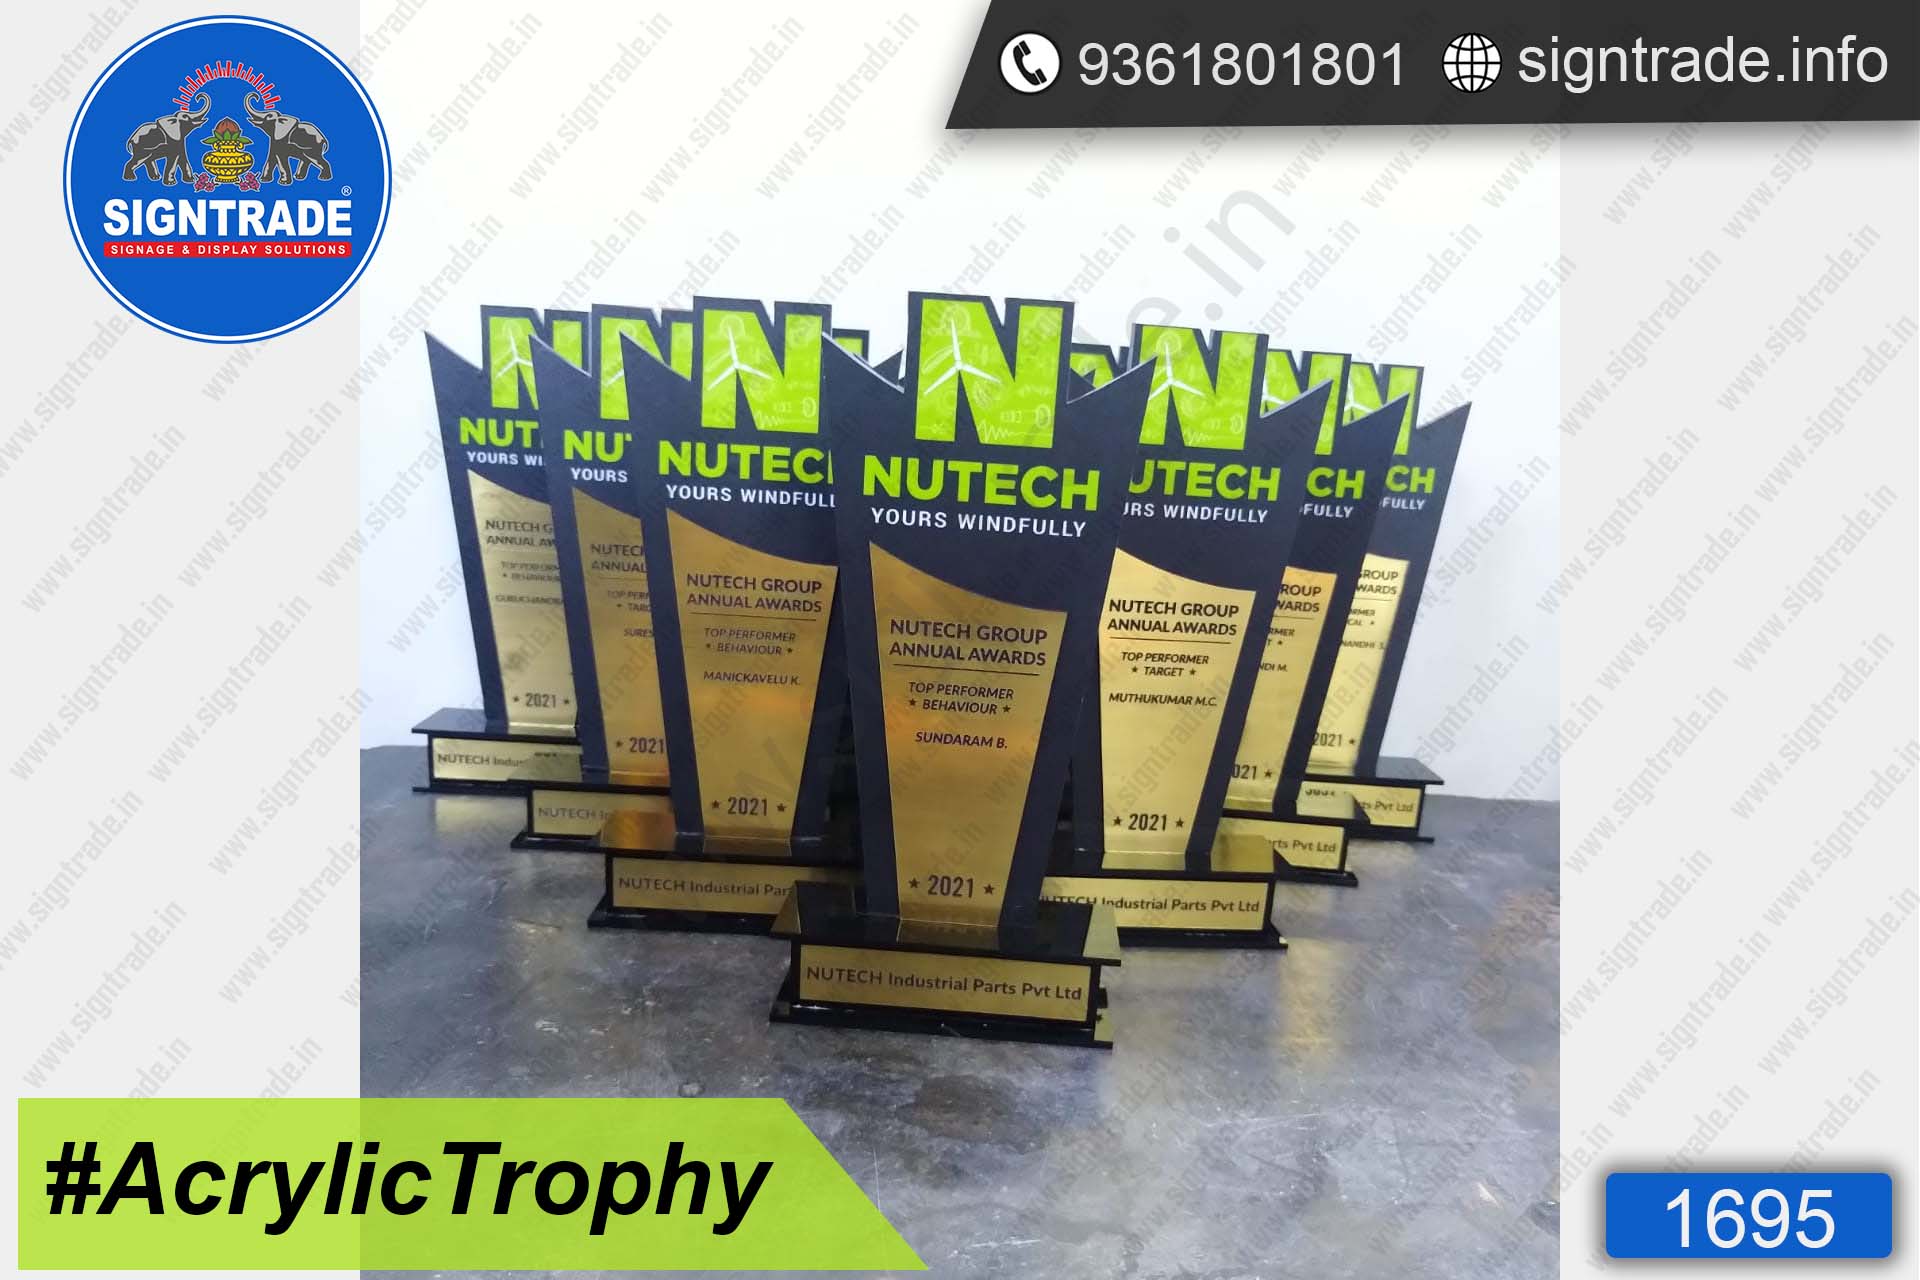 Nutech Industrial Parts Private Limited, Chennai - SIGNTRADE - Acrylic Trophy Manufacturers in Chennai